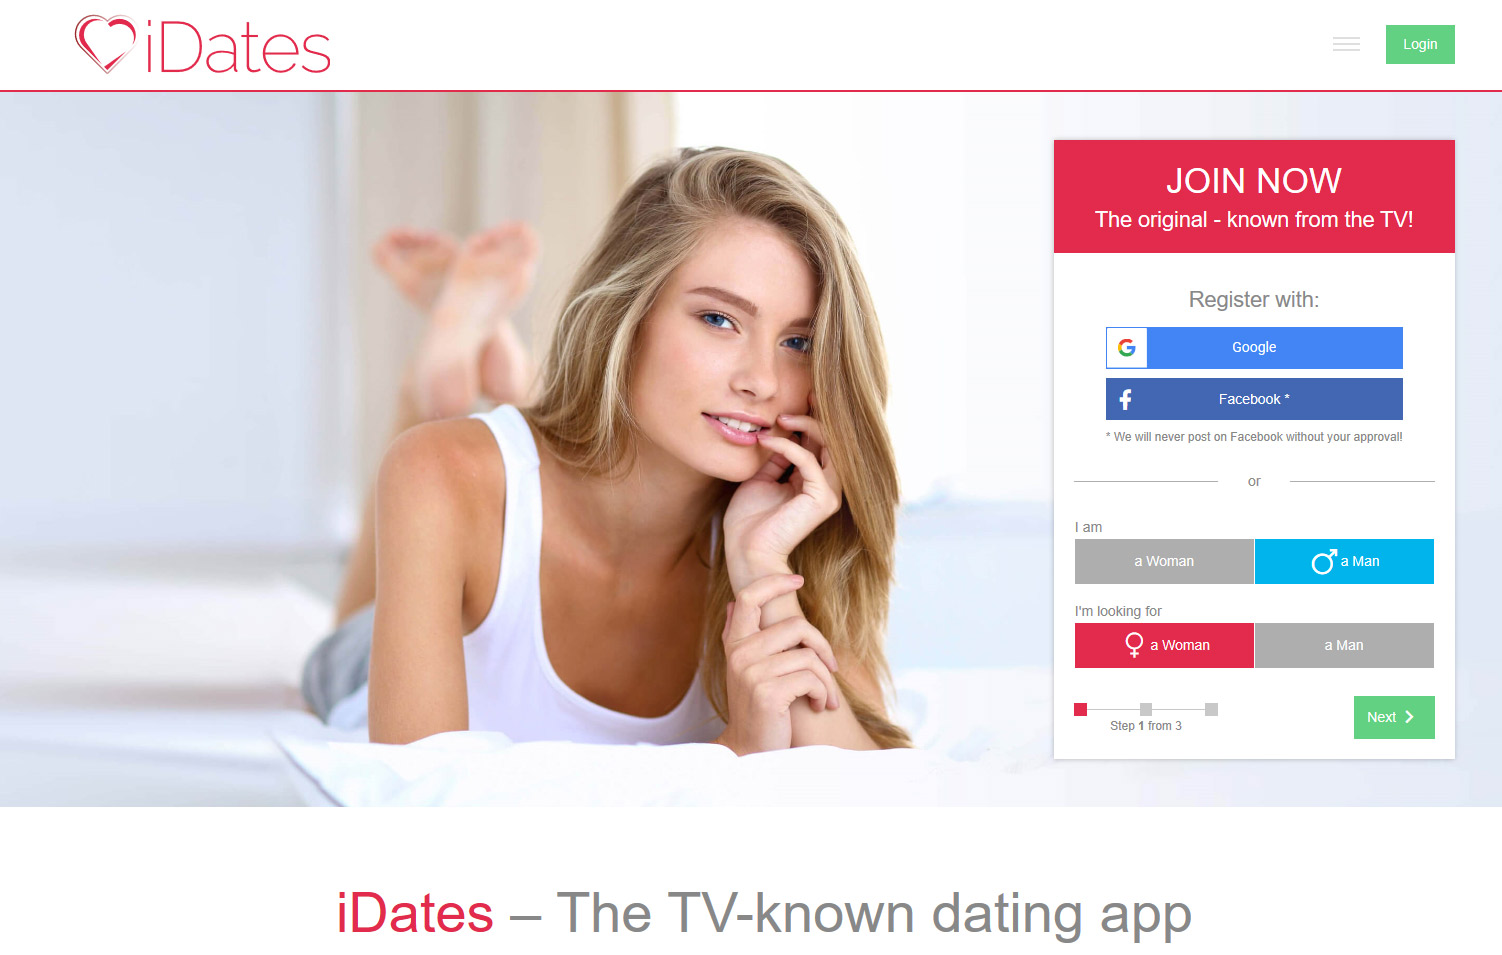 Hinge Dating App Review: A Profile to Be Deleted